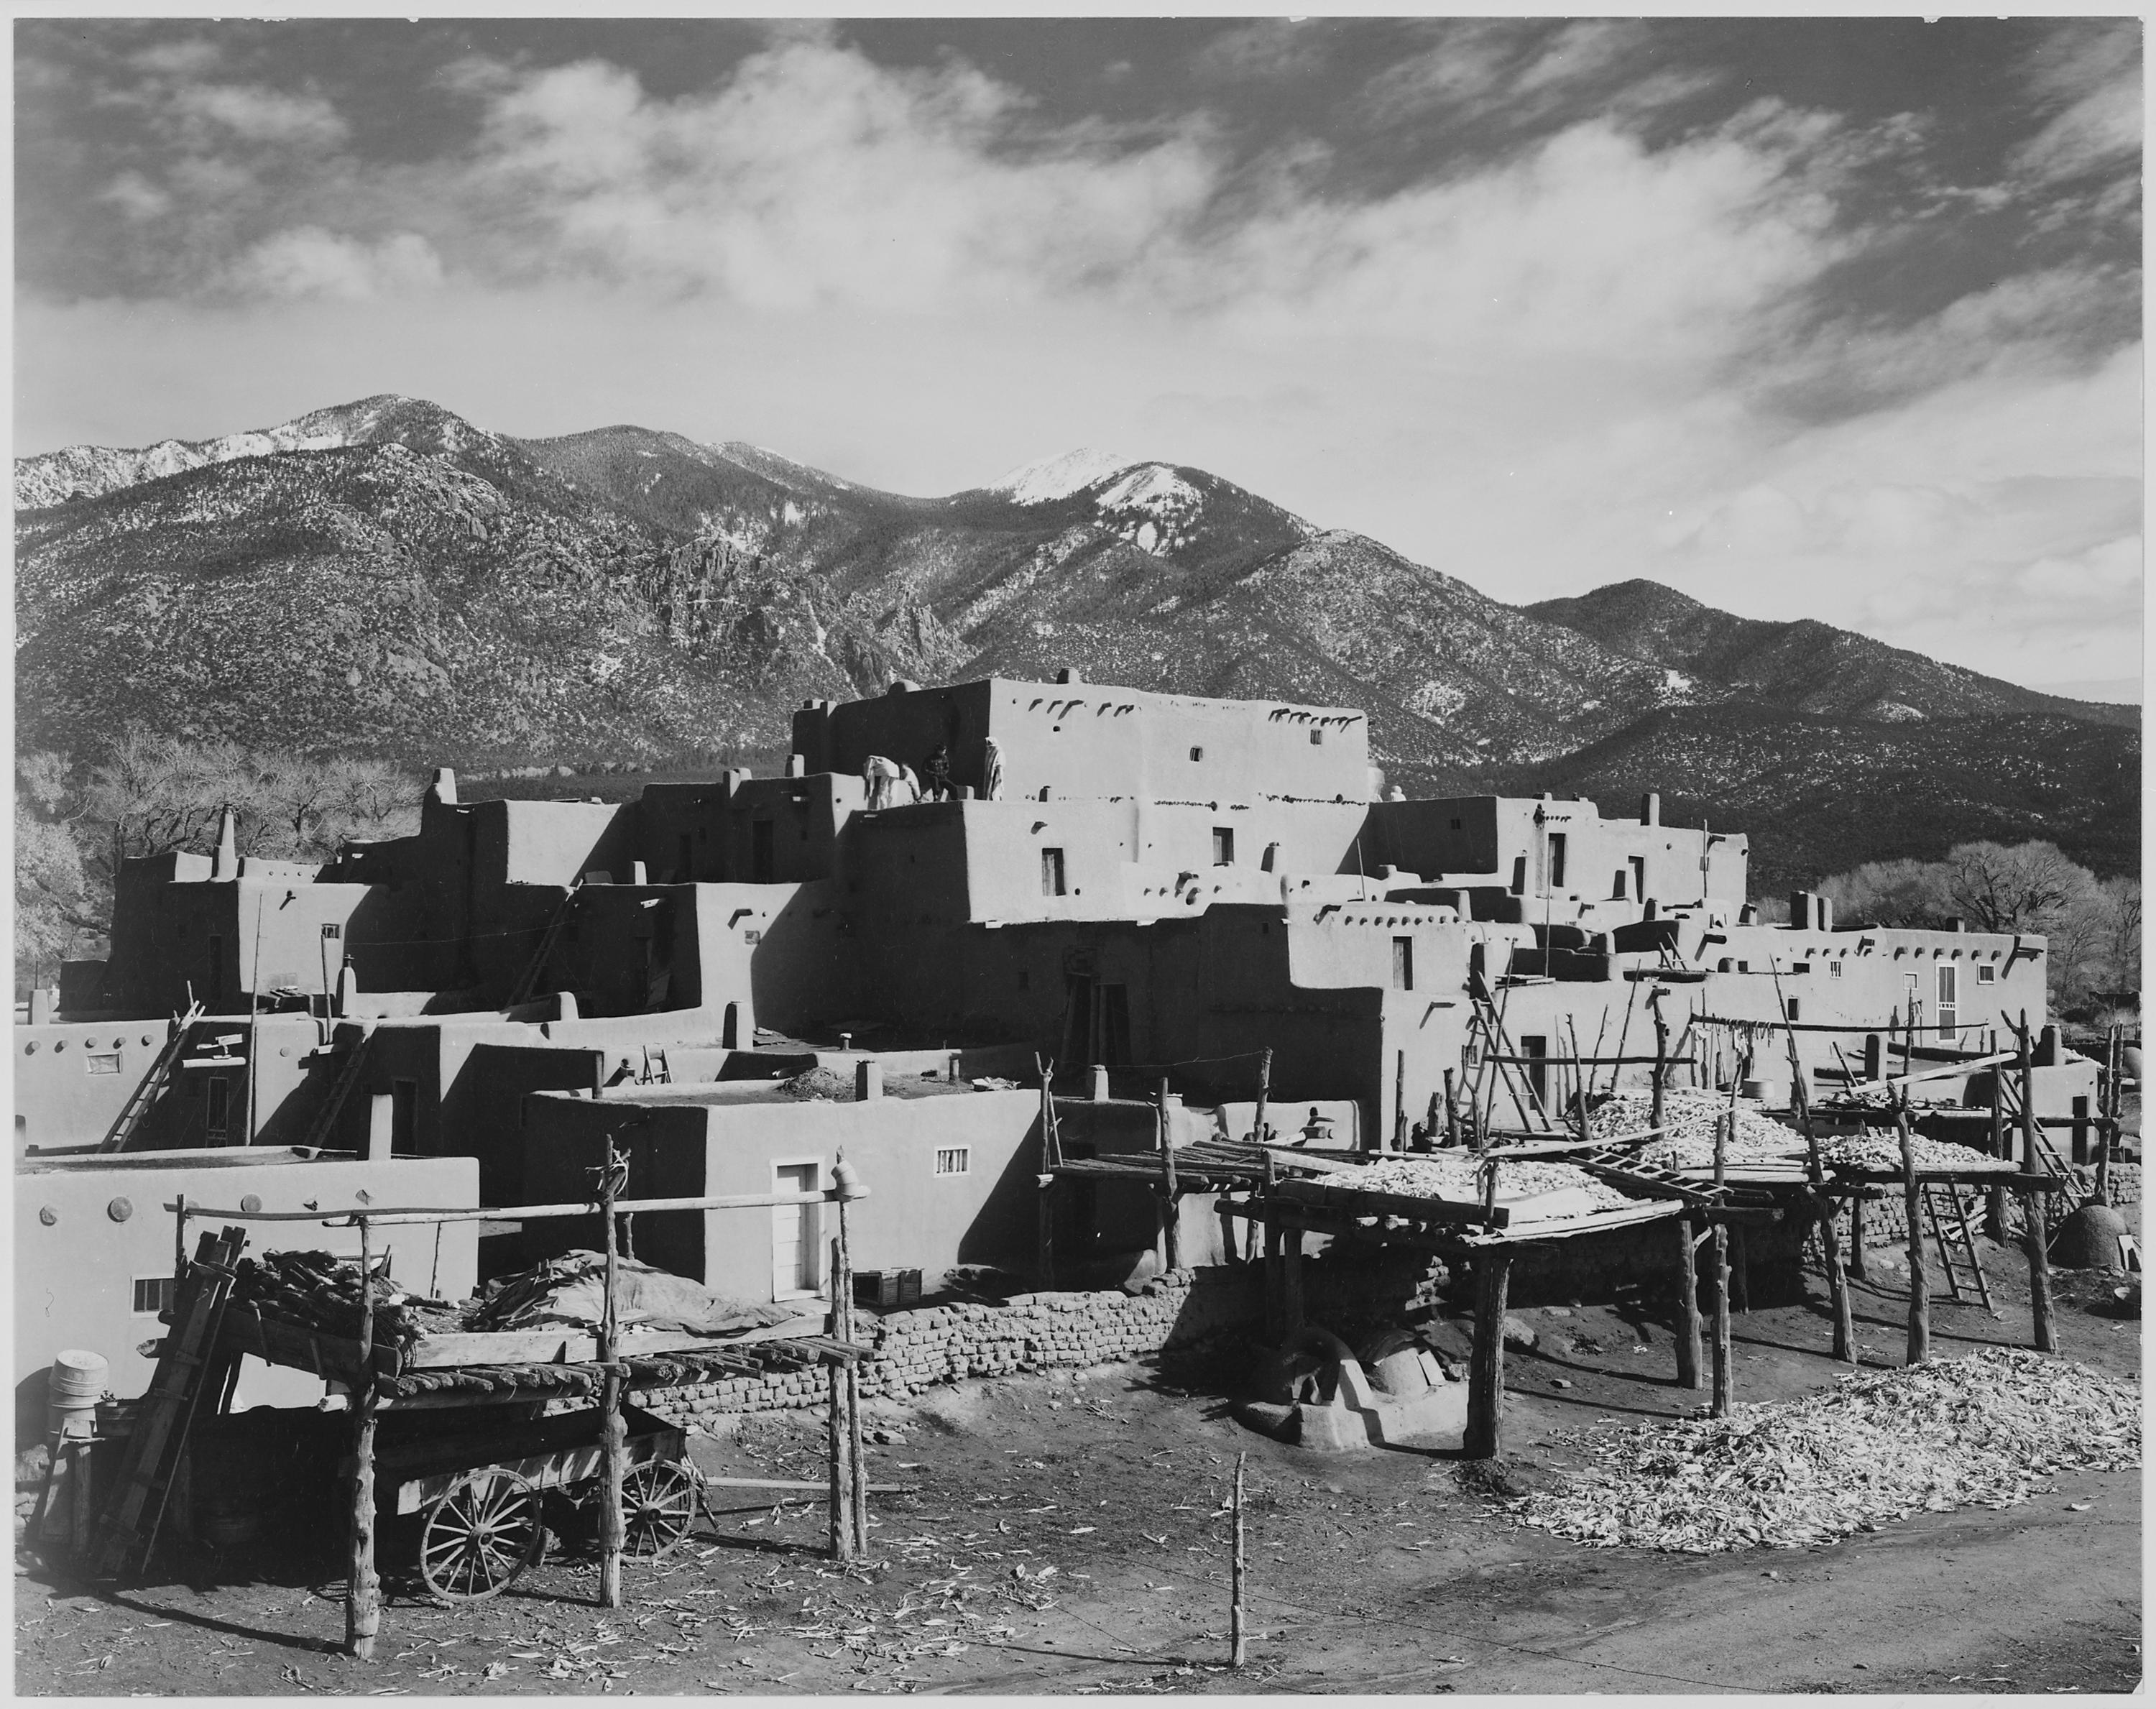 Ansel Adams - National Archives 79-AA-Q02